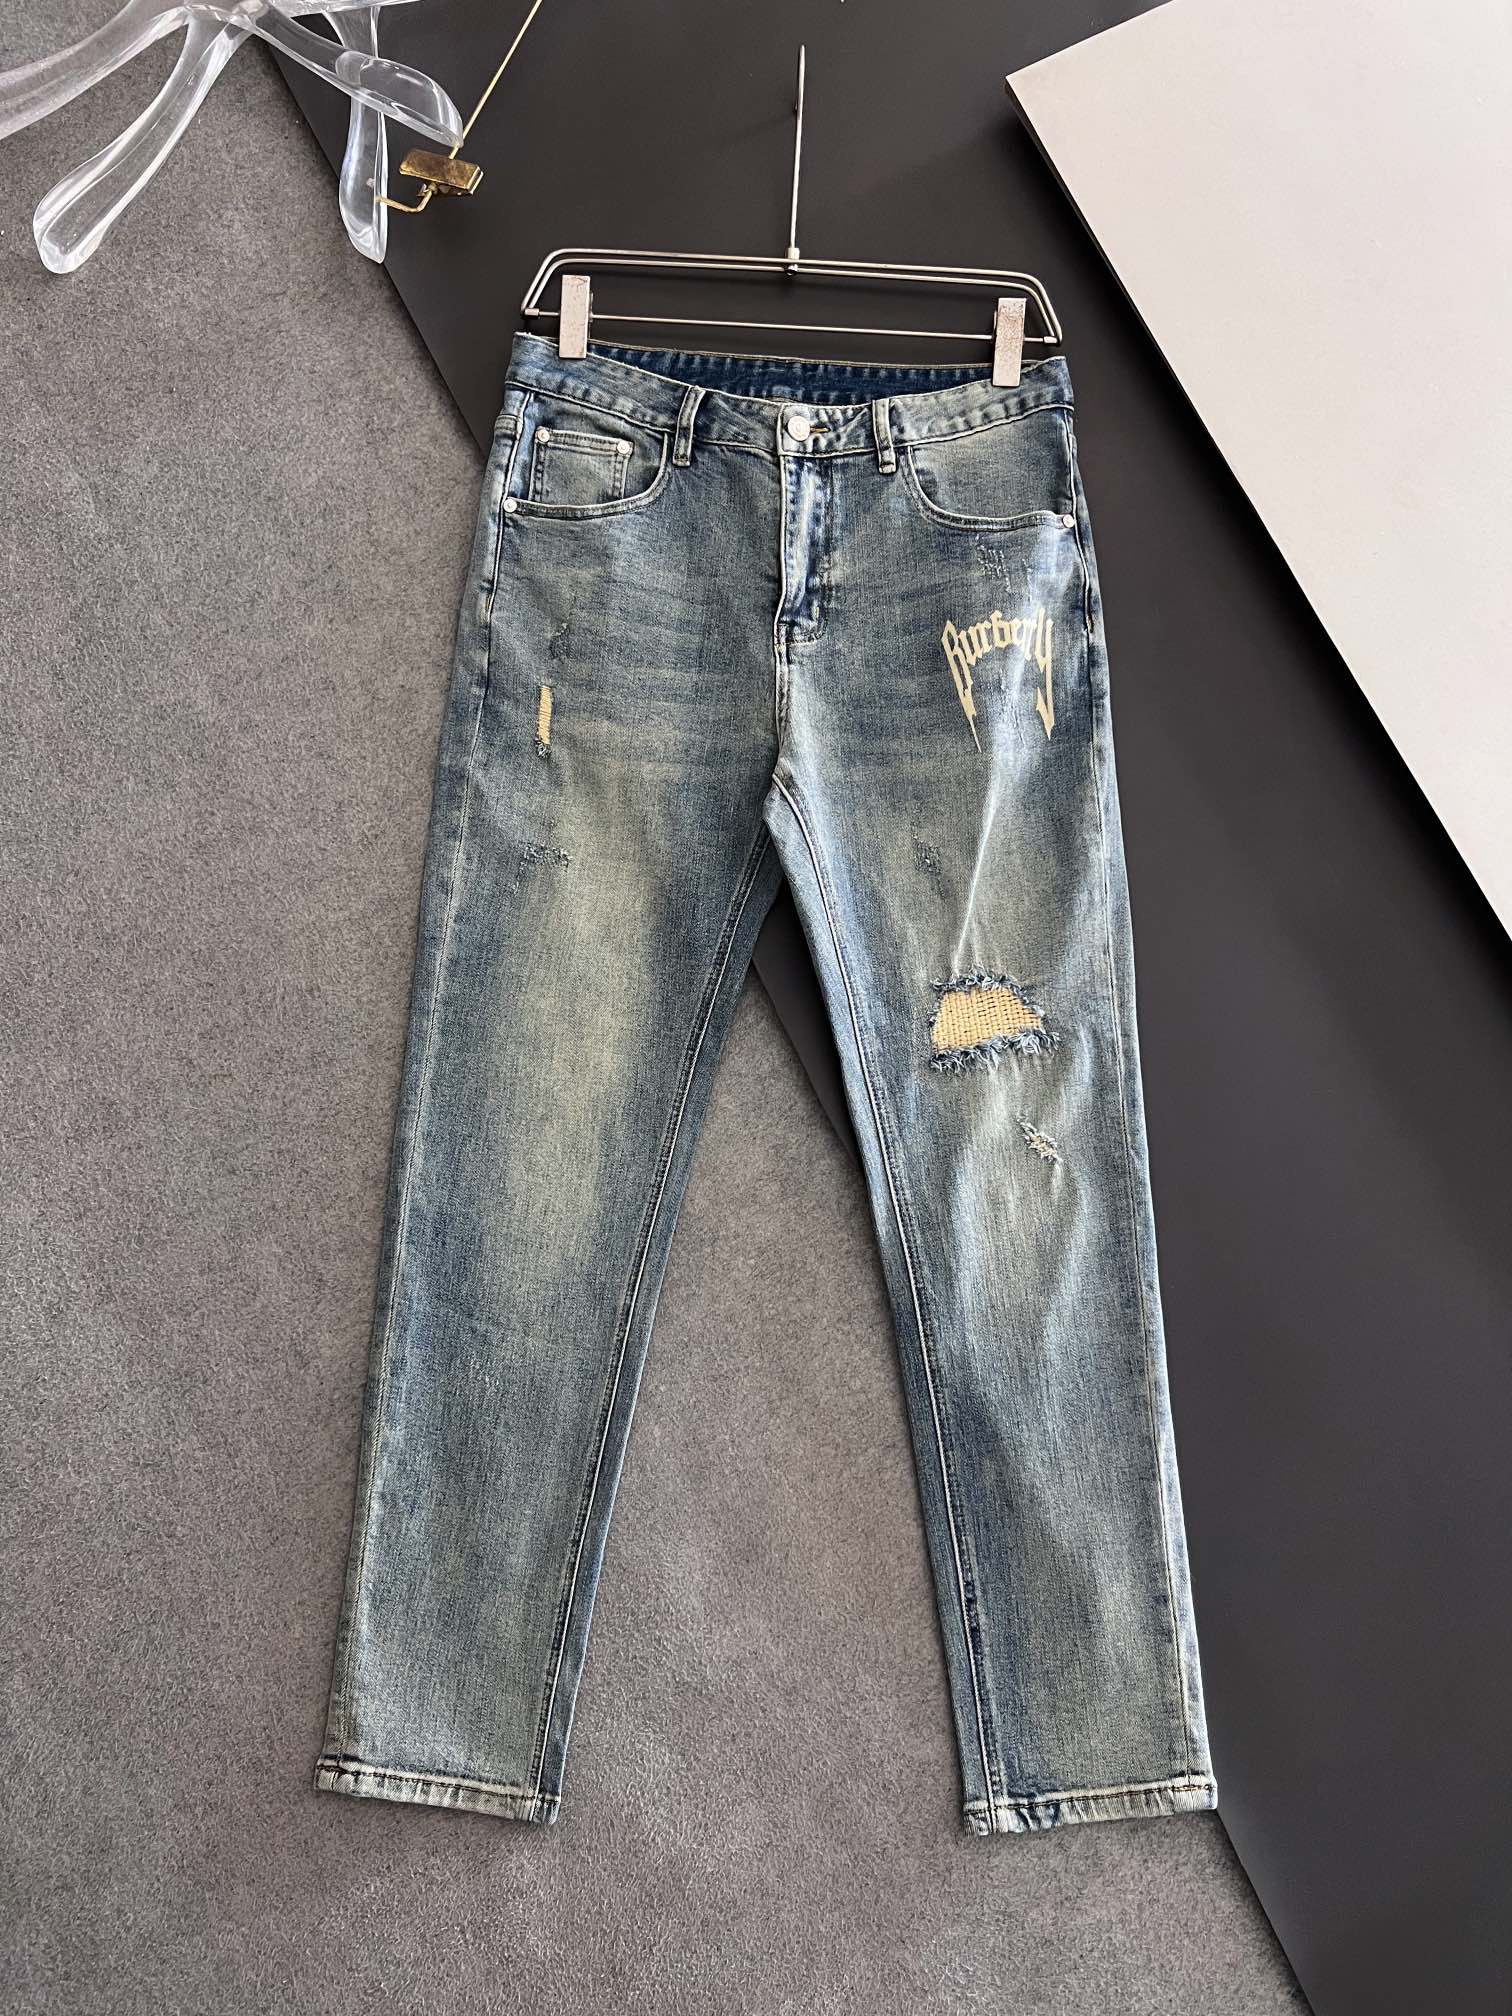 Buy best quality Replica
 Burberry Clothing Jeans Exclusive Cheap
 Casual